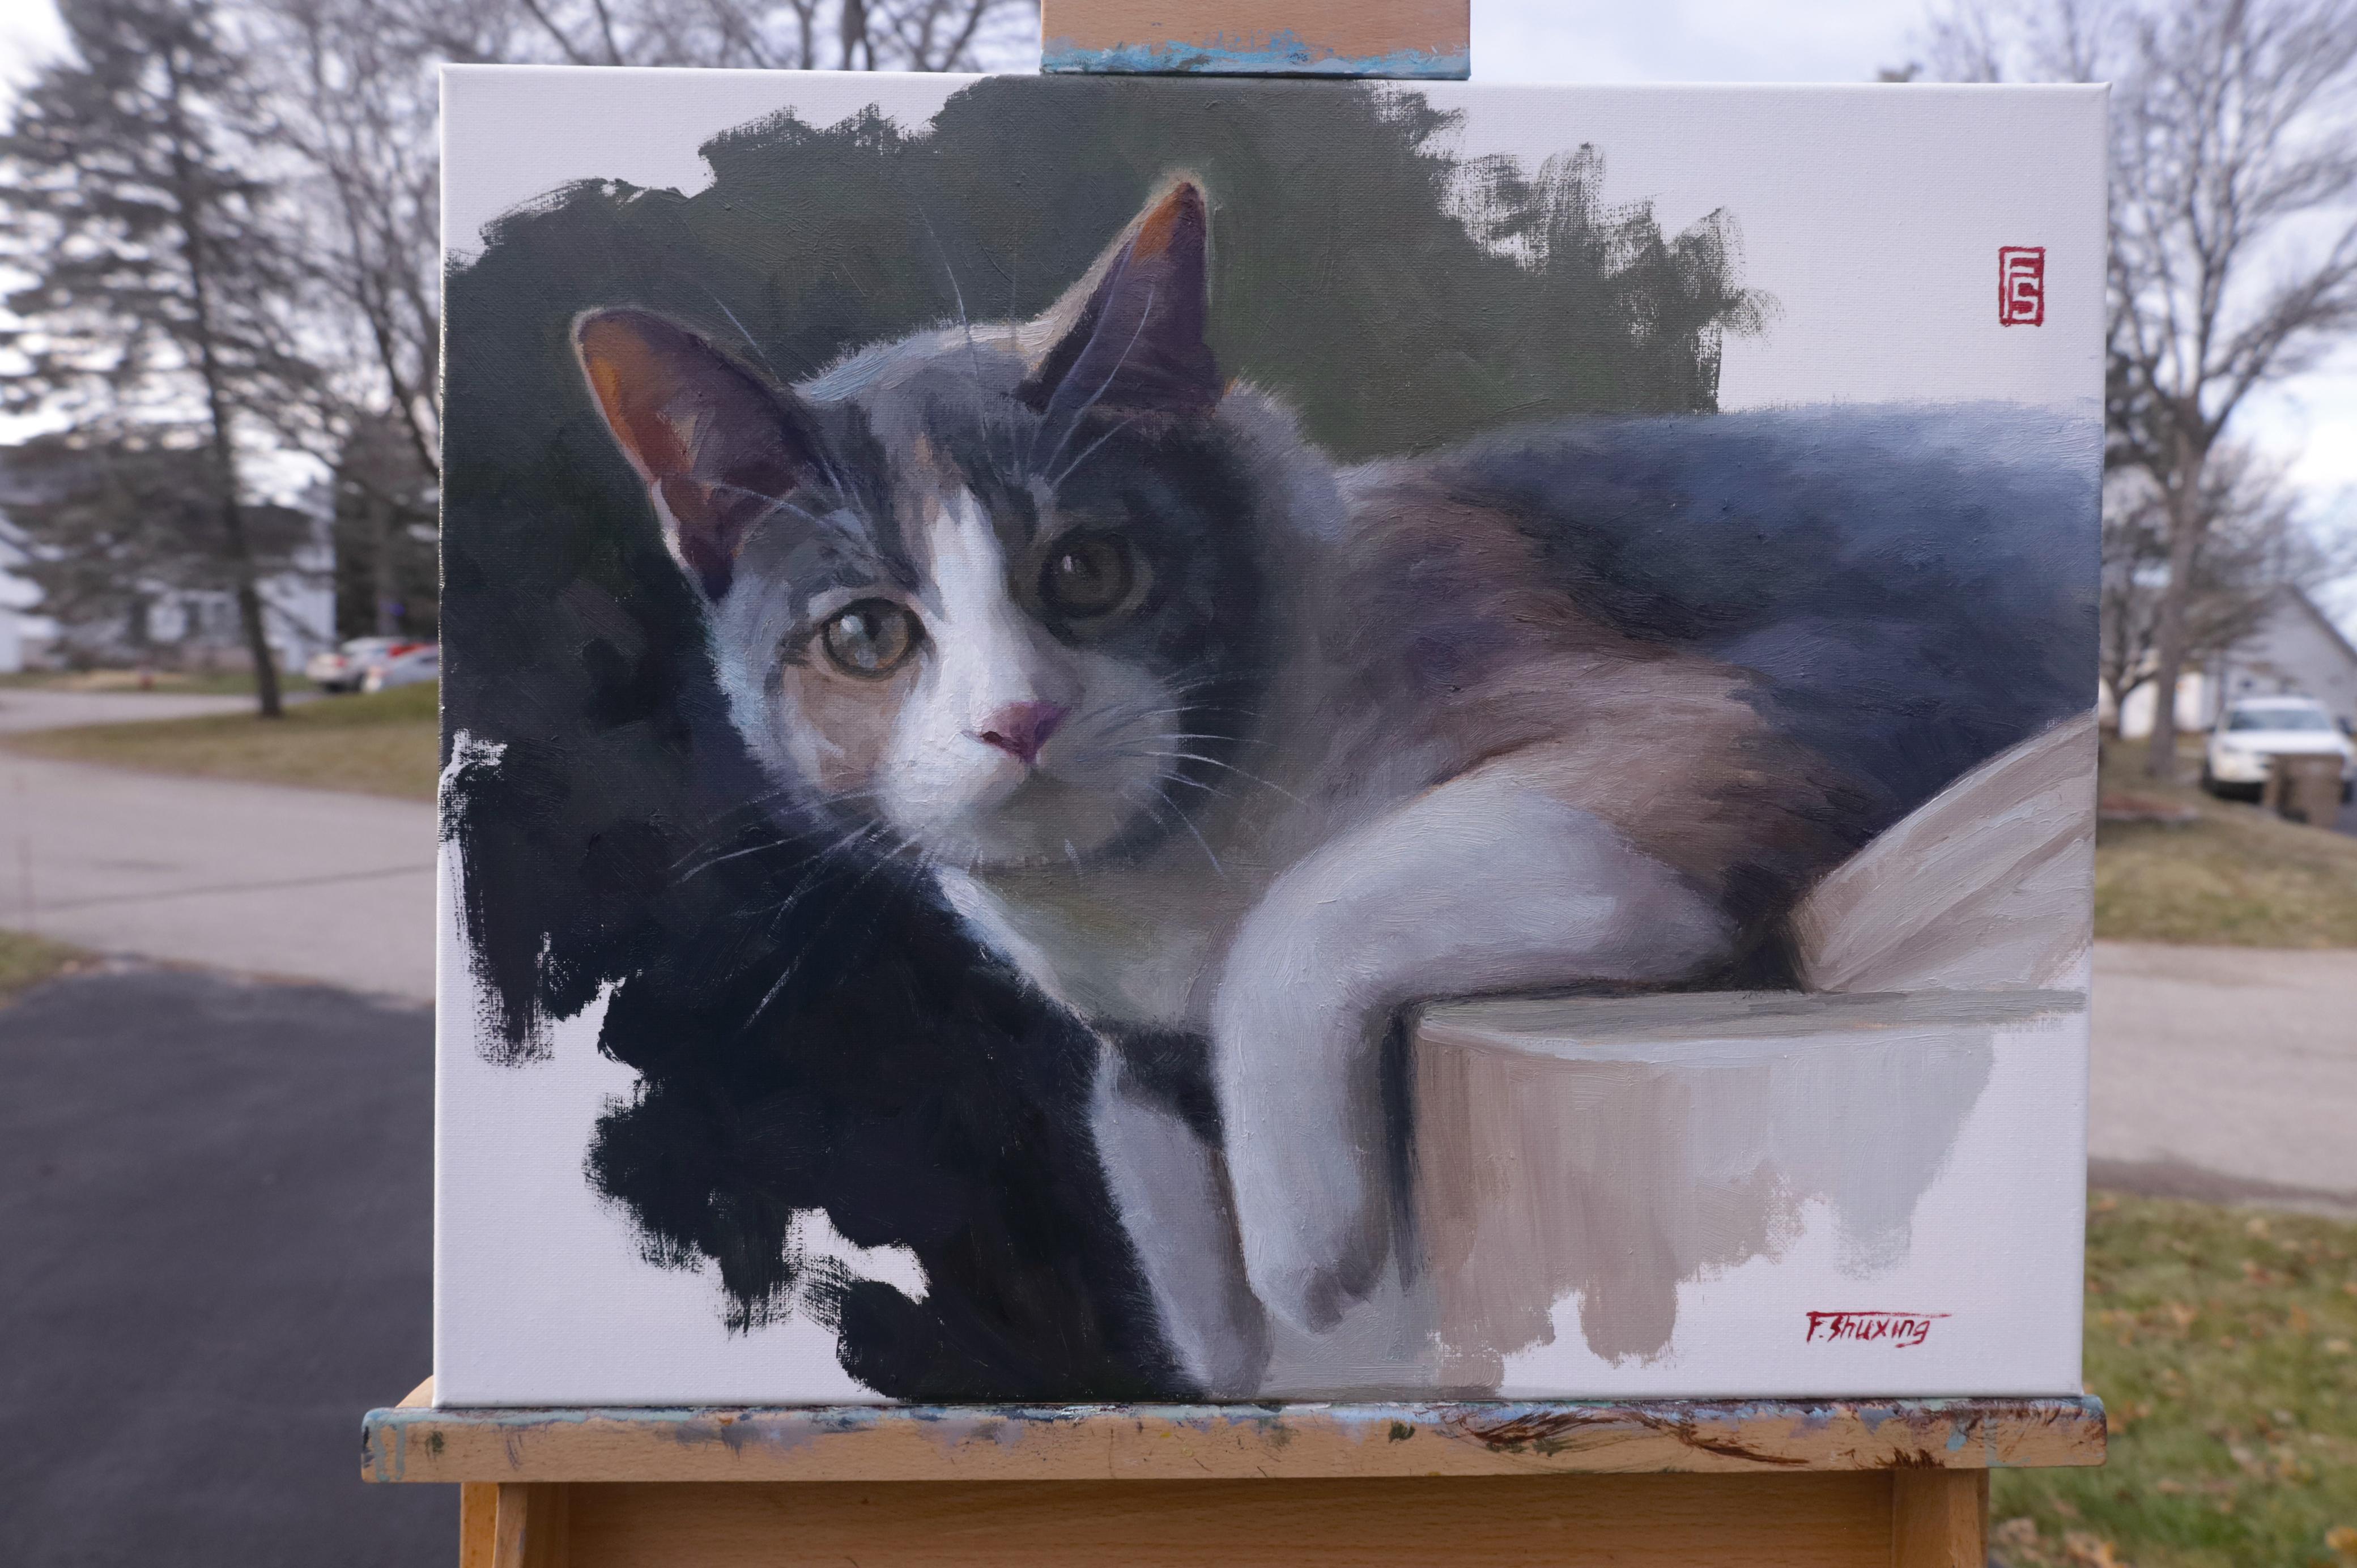 <p>Artist Comments<br>A calico cat displays its endearing charm. Painted in a realist style, artist Shuxing Fan portrays the curious gaze of his son's feline friend, with its eyes revealing a moment of quiet connection. The negative space in the